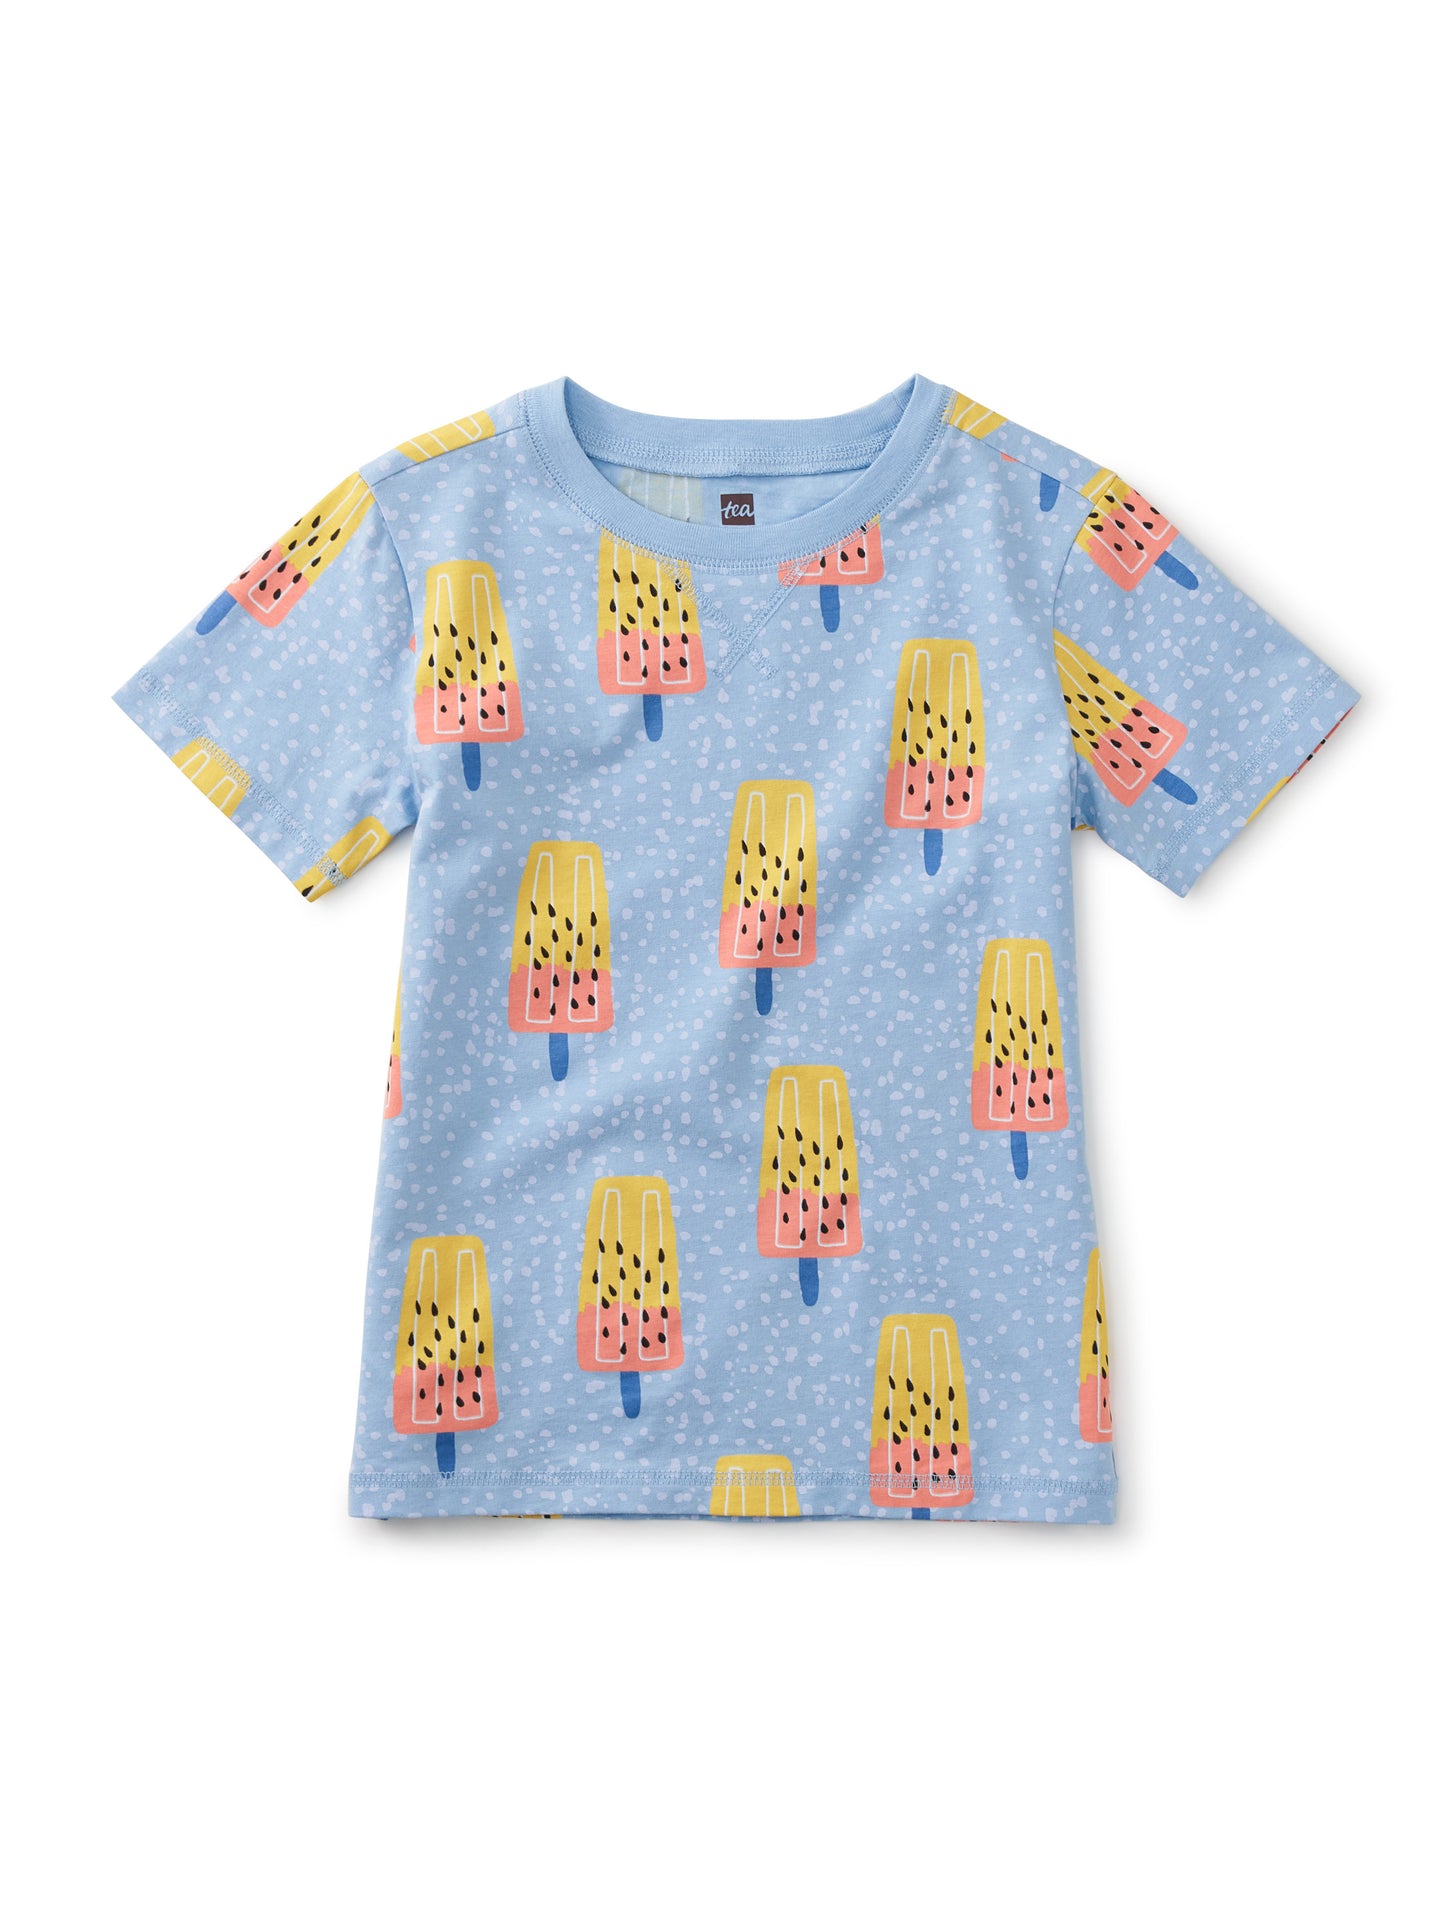 Melon Popsicles in Blue Printed Tee